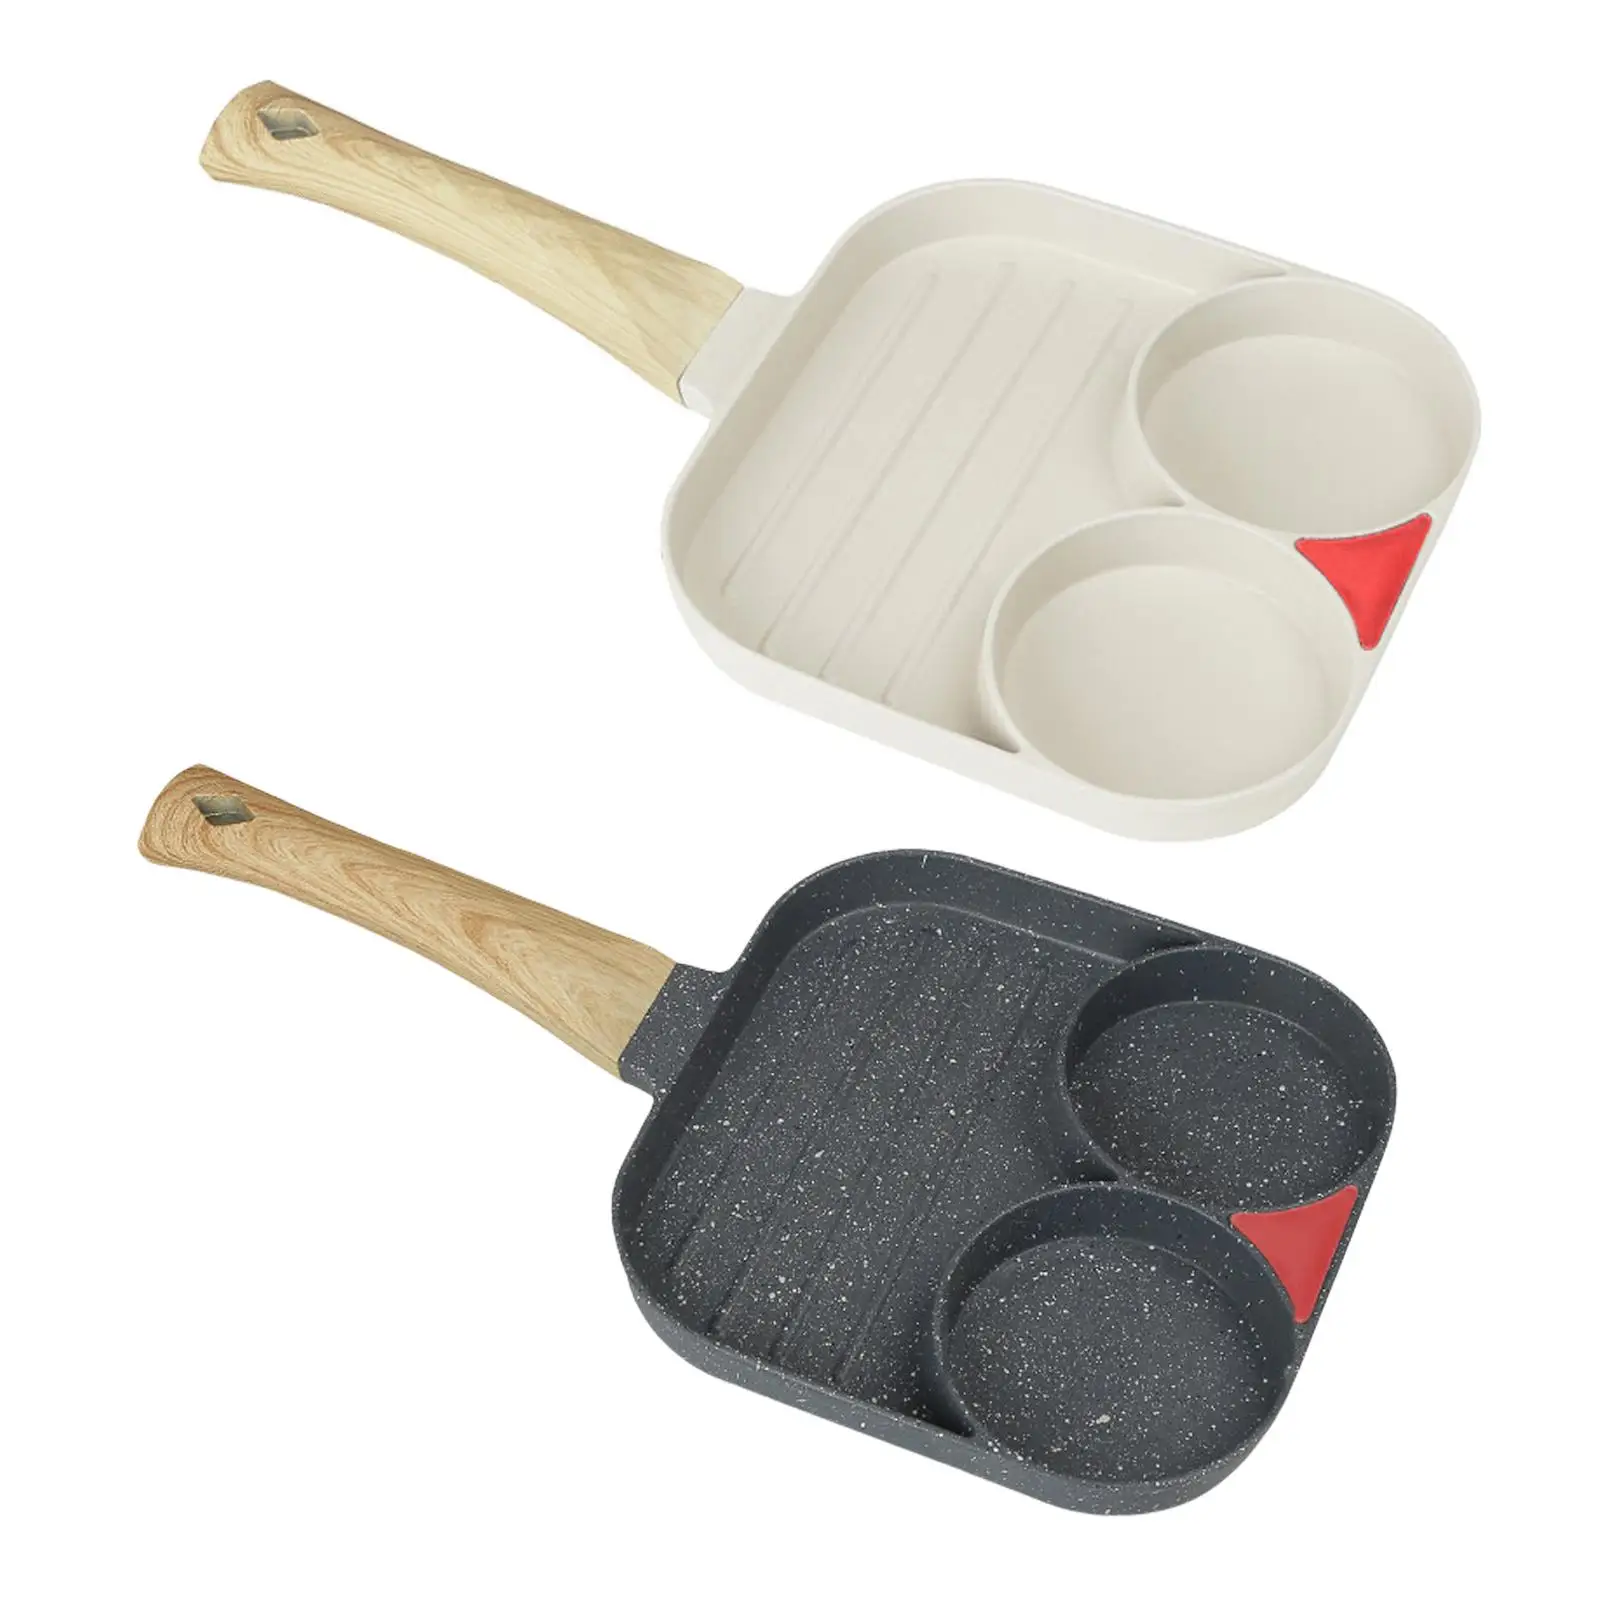 2 Hole Breakfast Frying Pan with Wooden Handle 3 Section Divided Skillet Omelet Pot for Frying Baking Vegetable Burger Breakfast